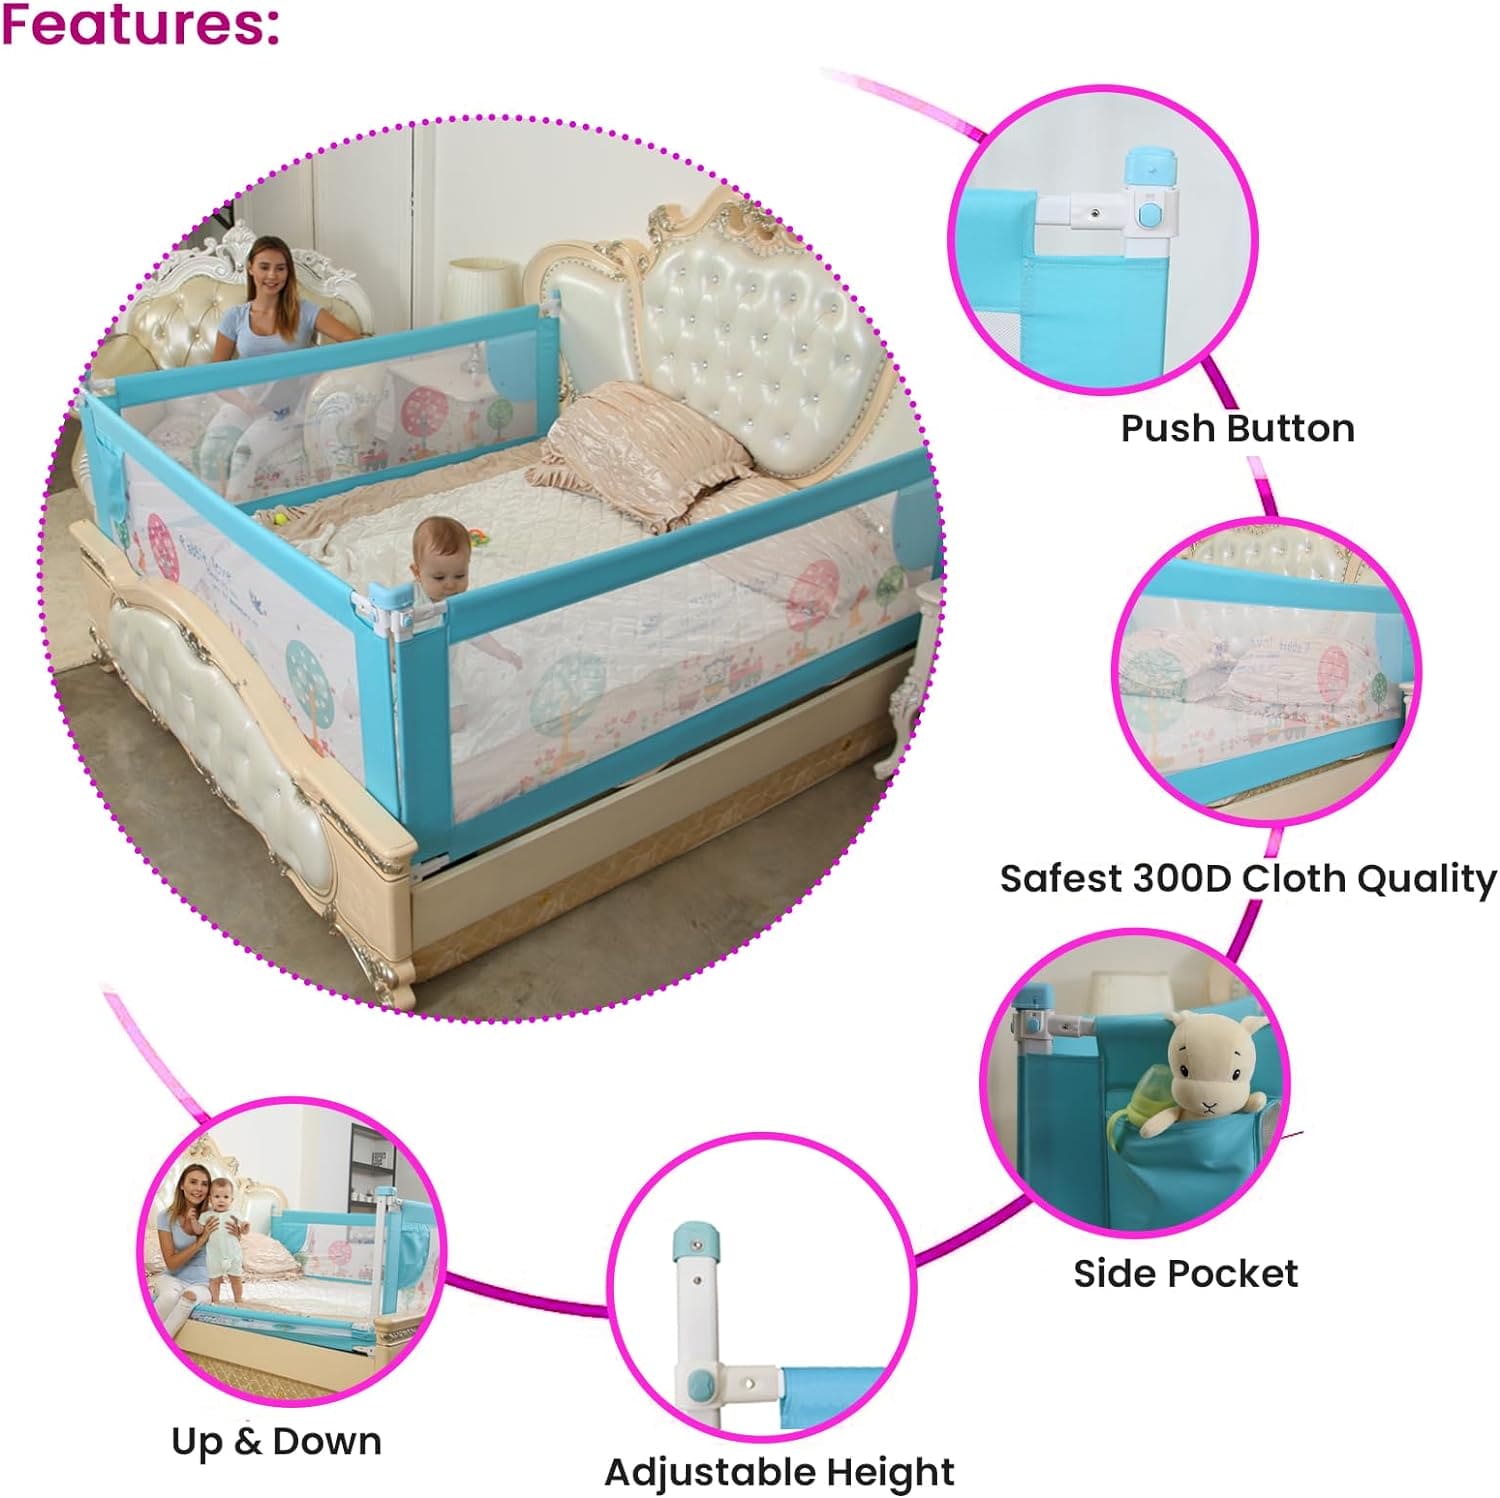 Baby Bed Safety Guard, Children Bed Barrier, Fence Guardrail Security, Foldable Baby Bed Fencing Gate, Crib Adjustable Safety Kids Rails, Safety Protection Guard Beige for Toddler, Up & Down Falling Protector Bed Rails for Kids